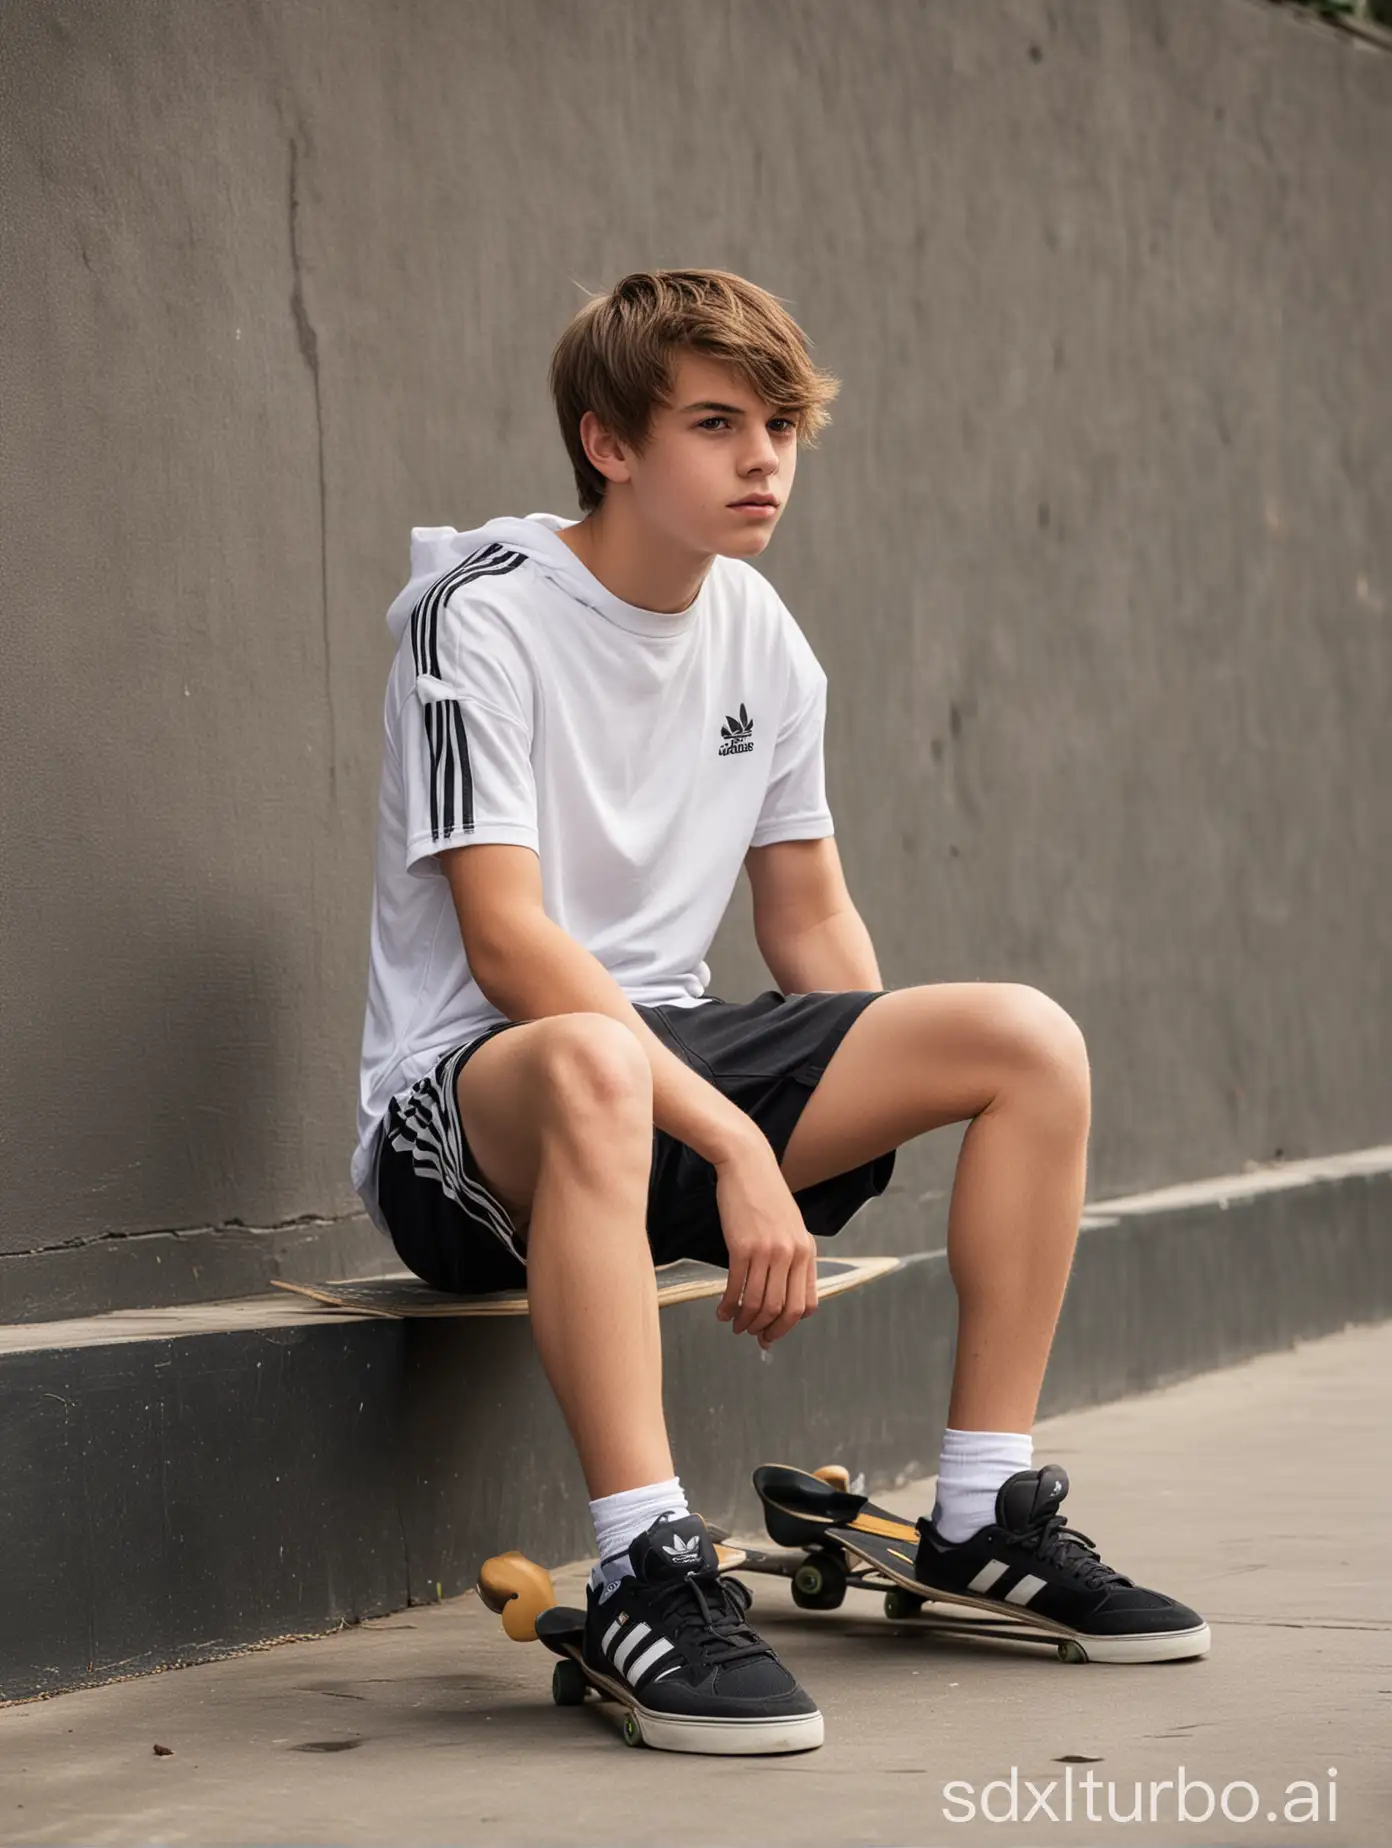 teen boy with strong legs and thighs in very tight adidas shorts sits on skateboard